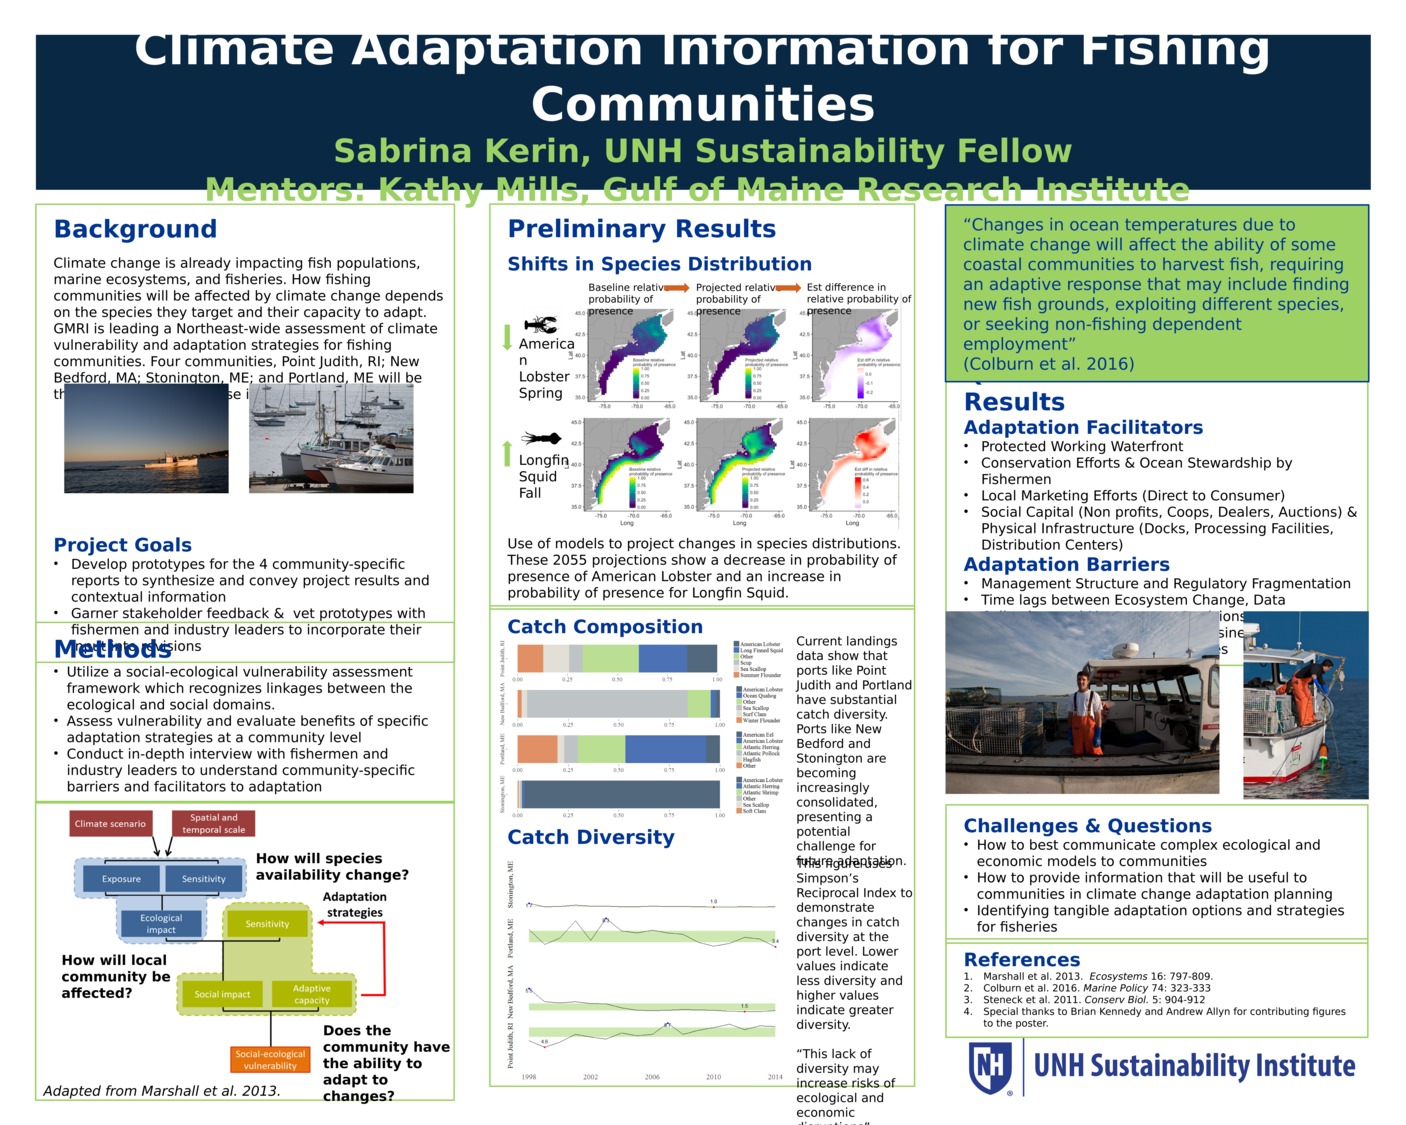 Climate Adaptation Information For Fishing Communities by Skerin